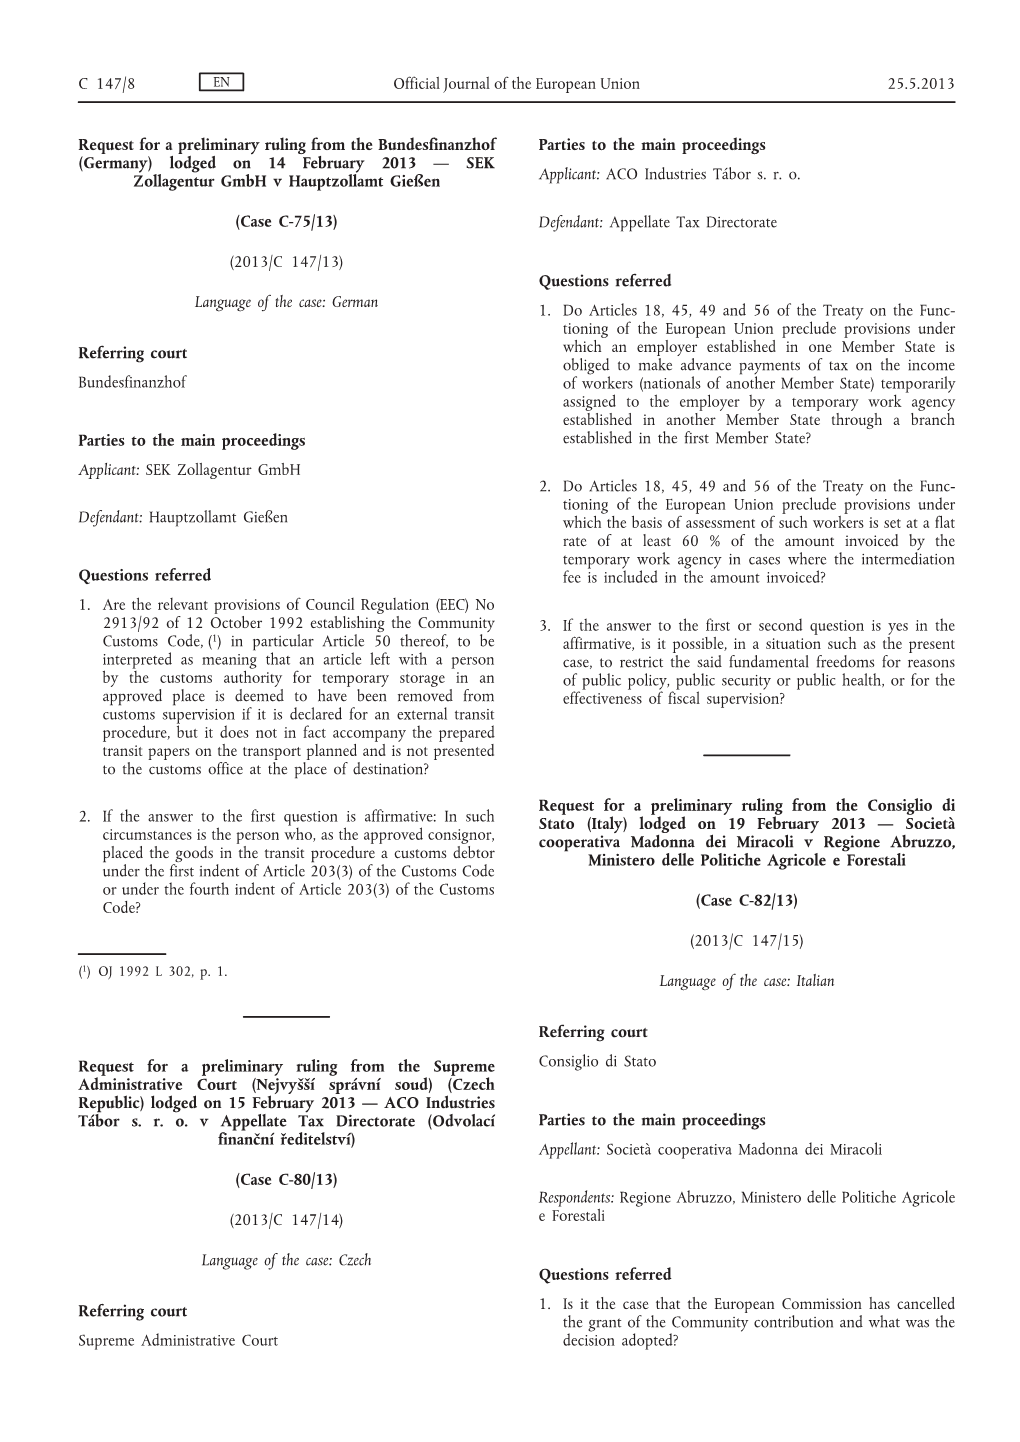 Case C-82/13: Request for a Preliminary Ruling from The